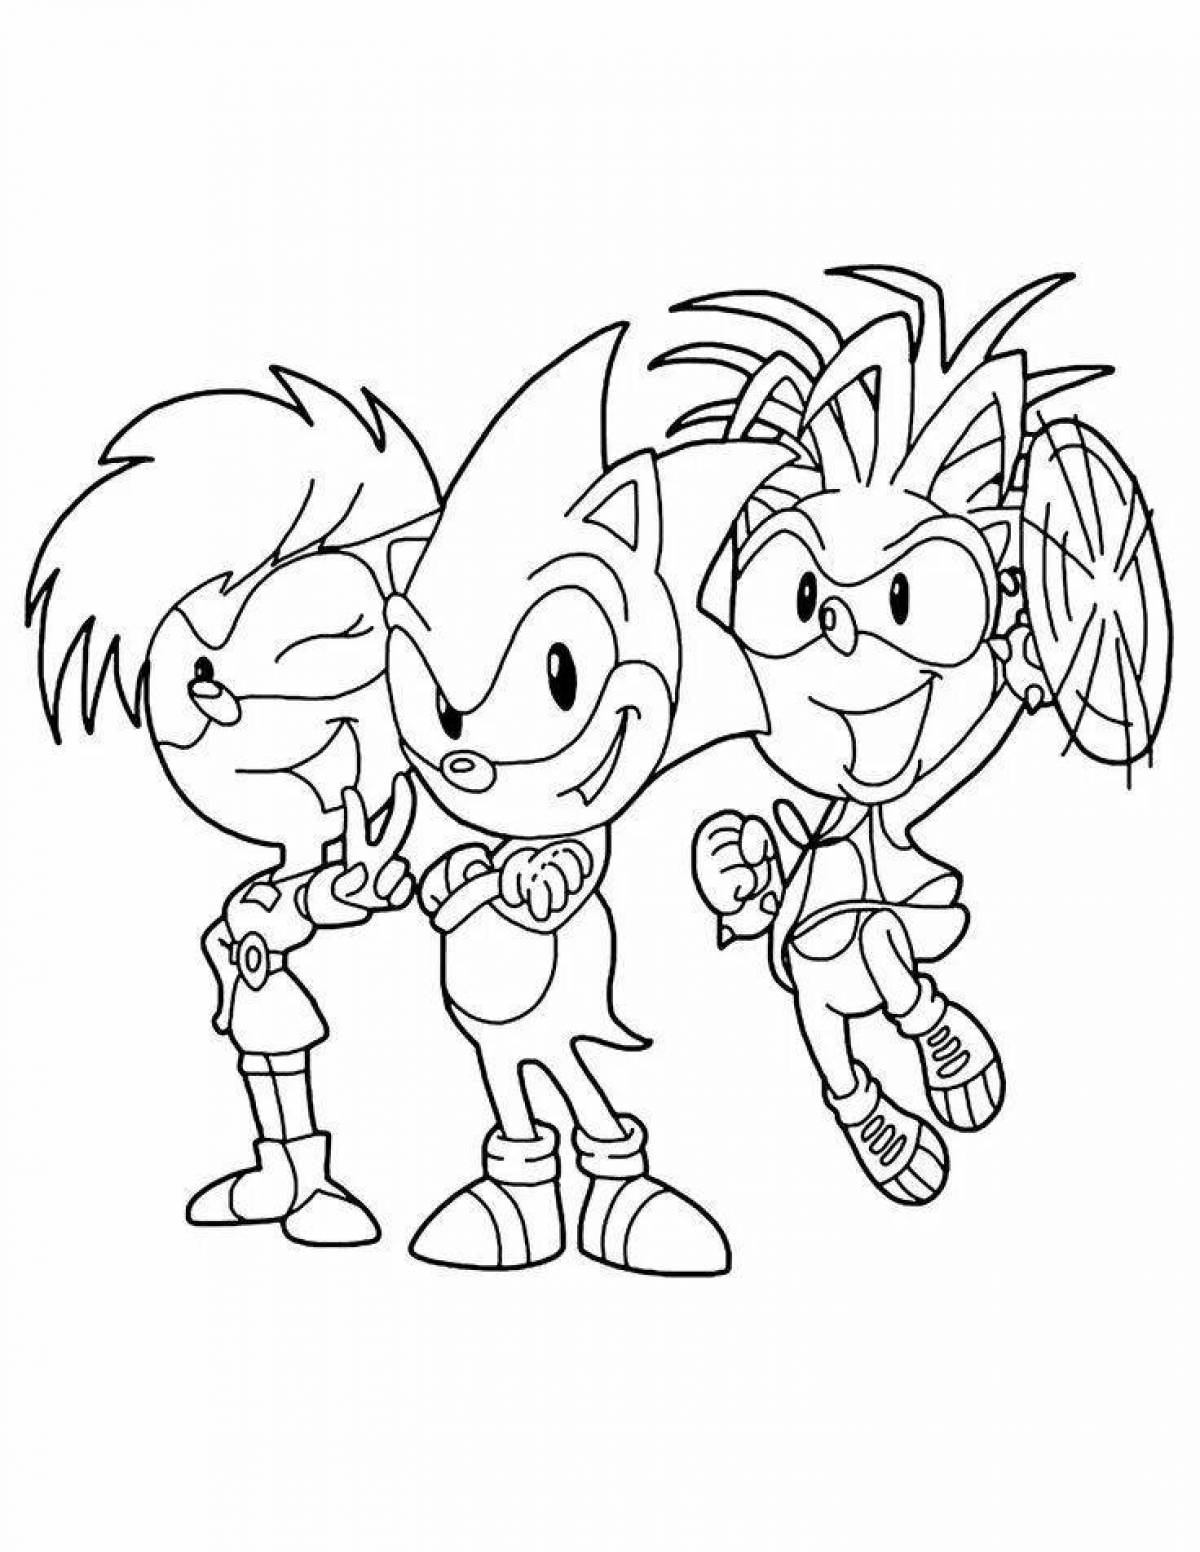 Creative sonic coloring by numbers